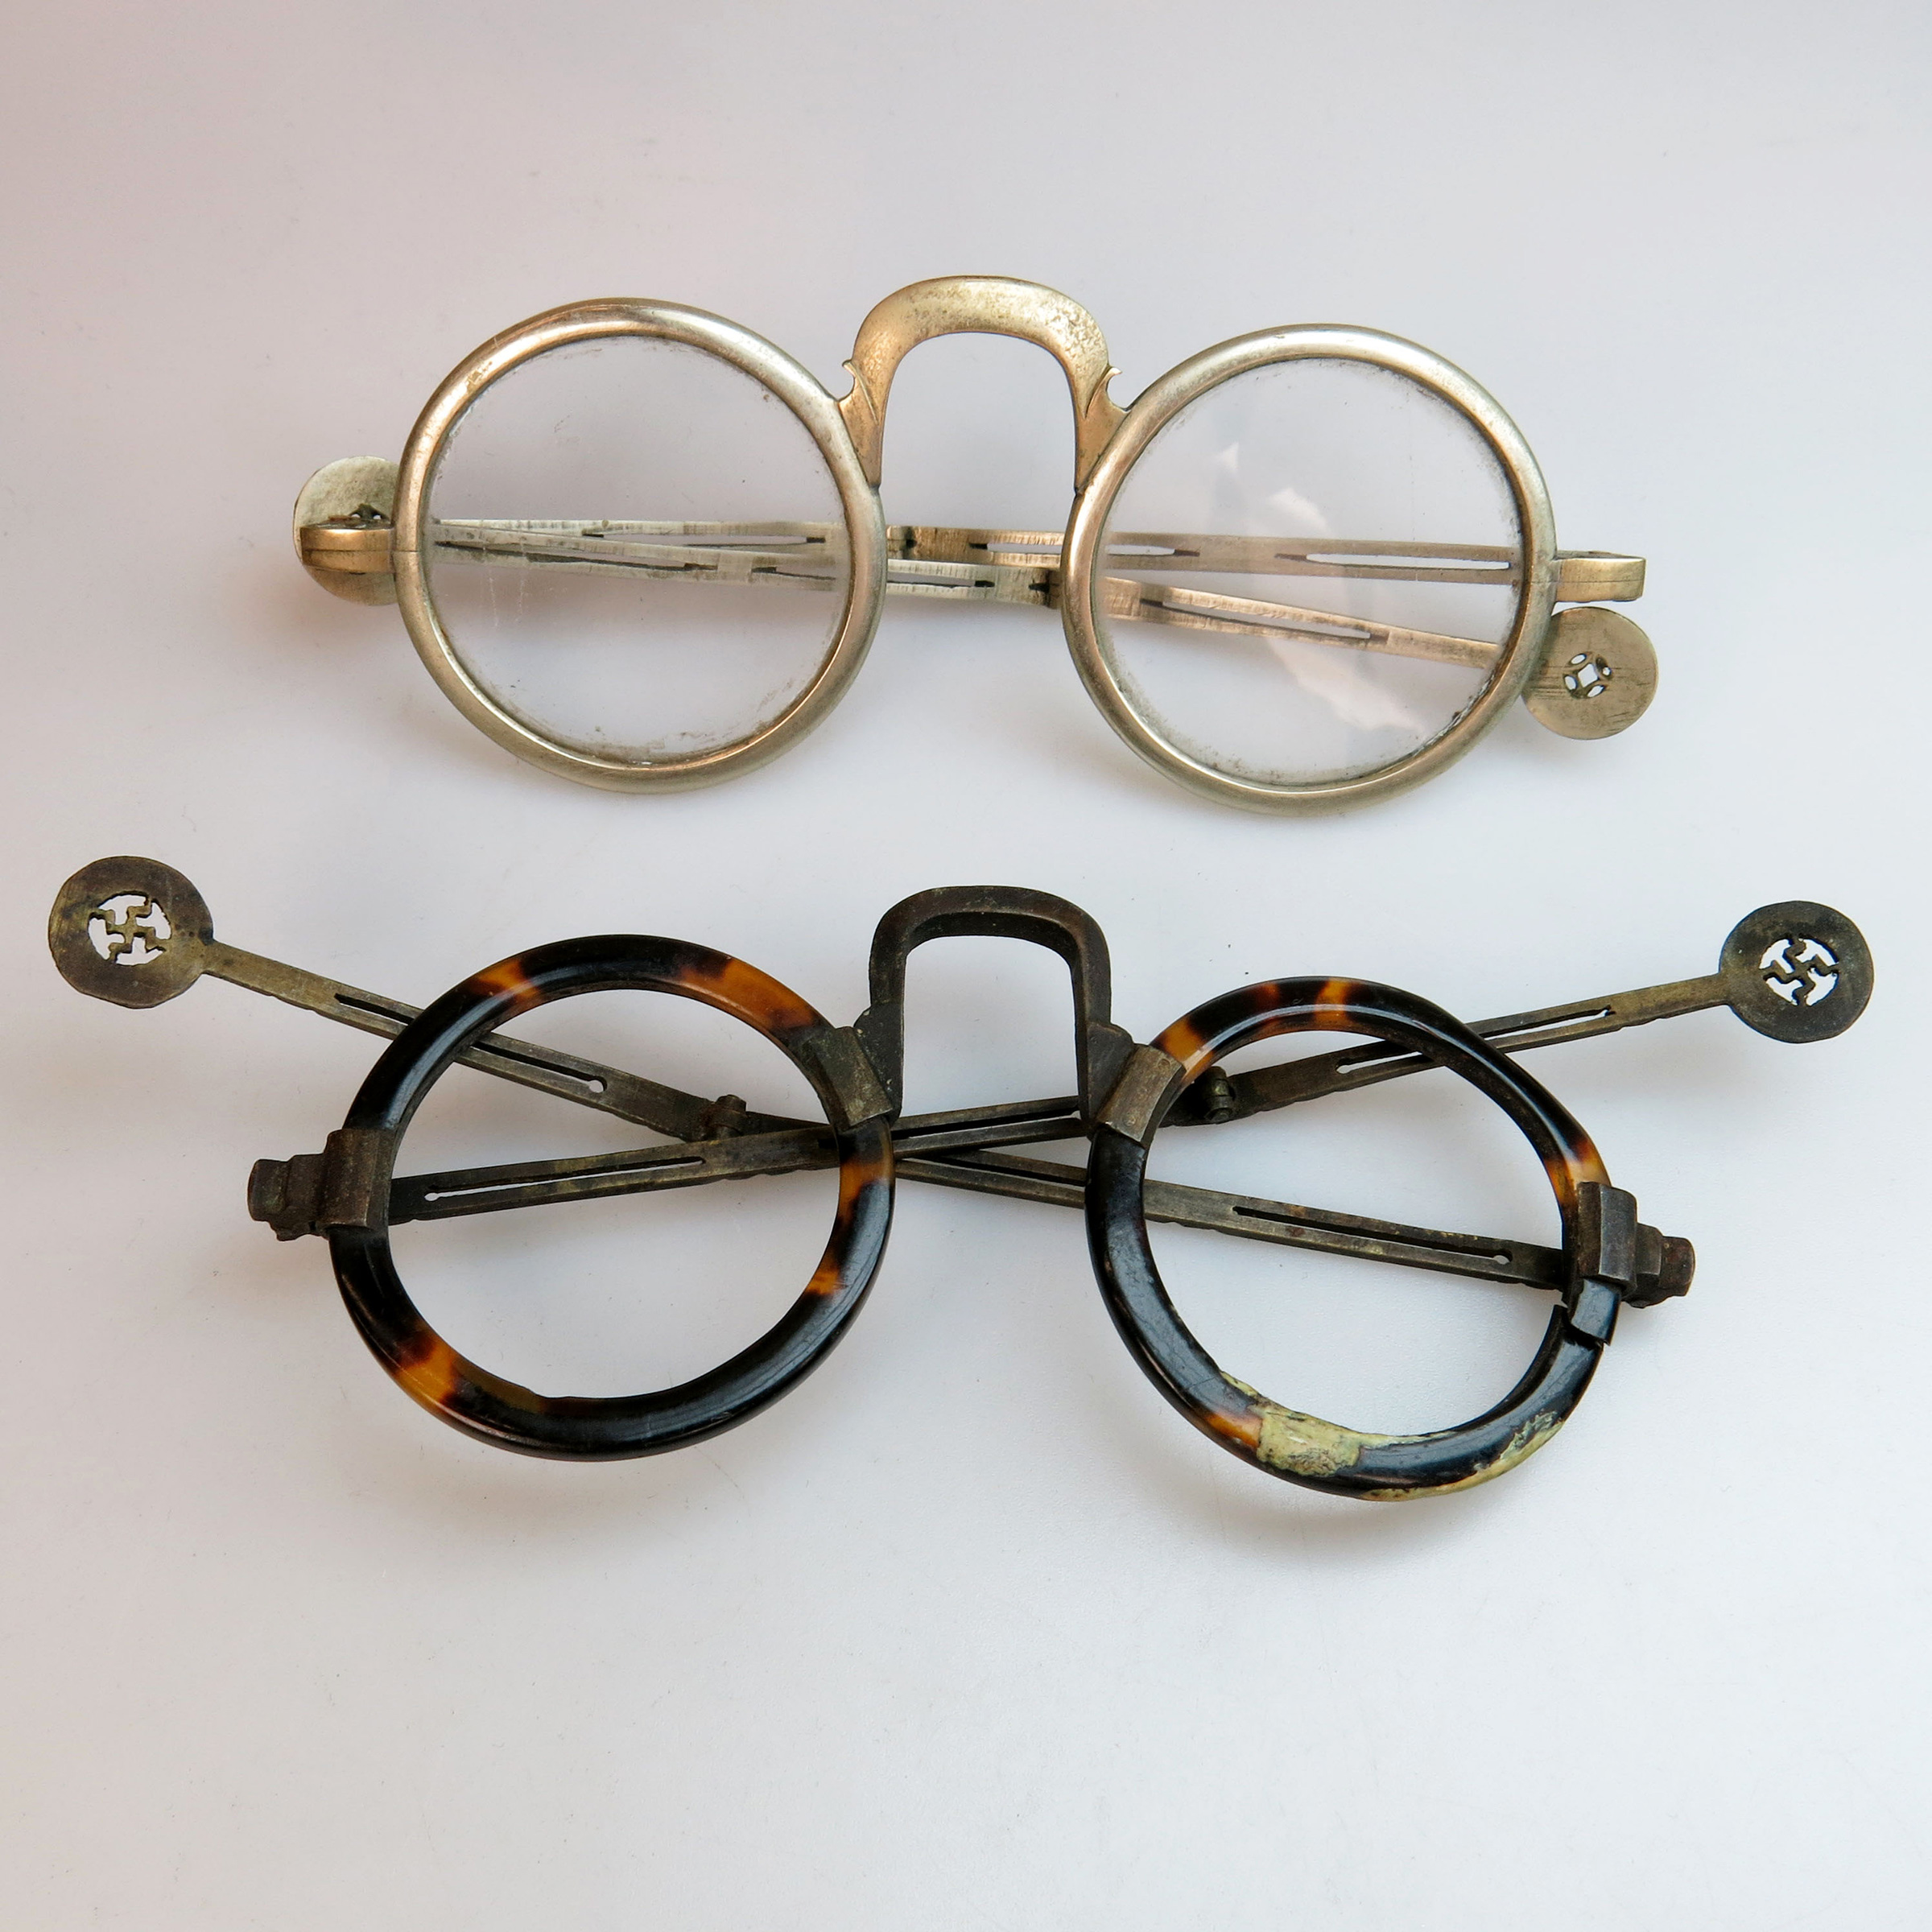 2 Pairs Of 19th Century Chinese Spectacles